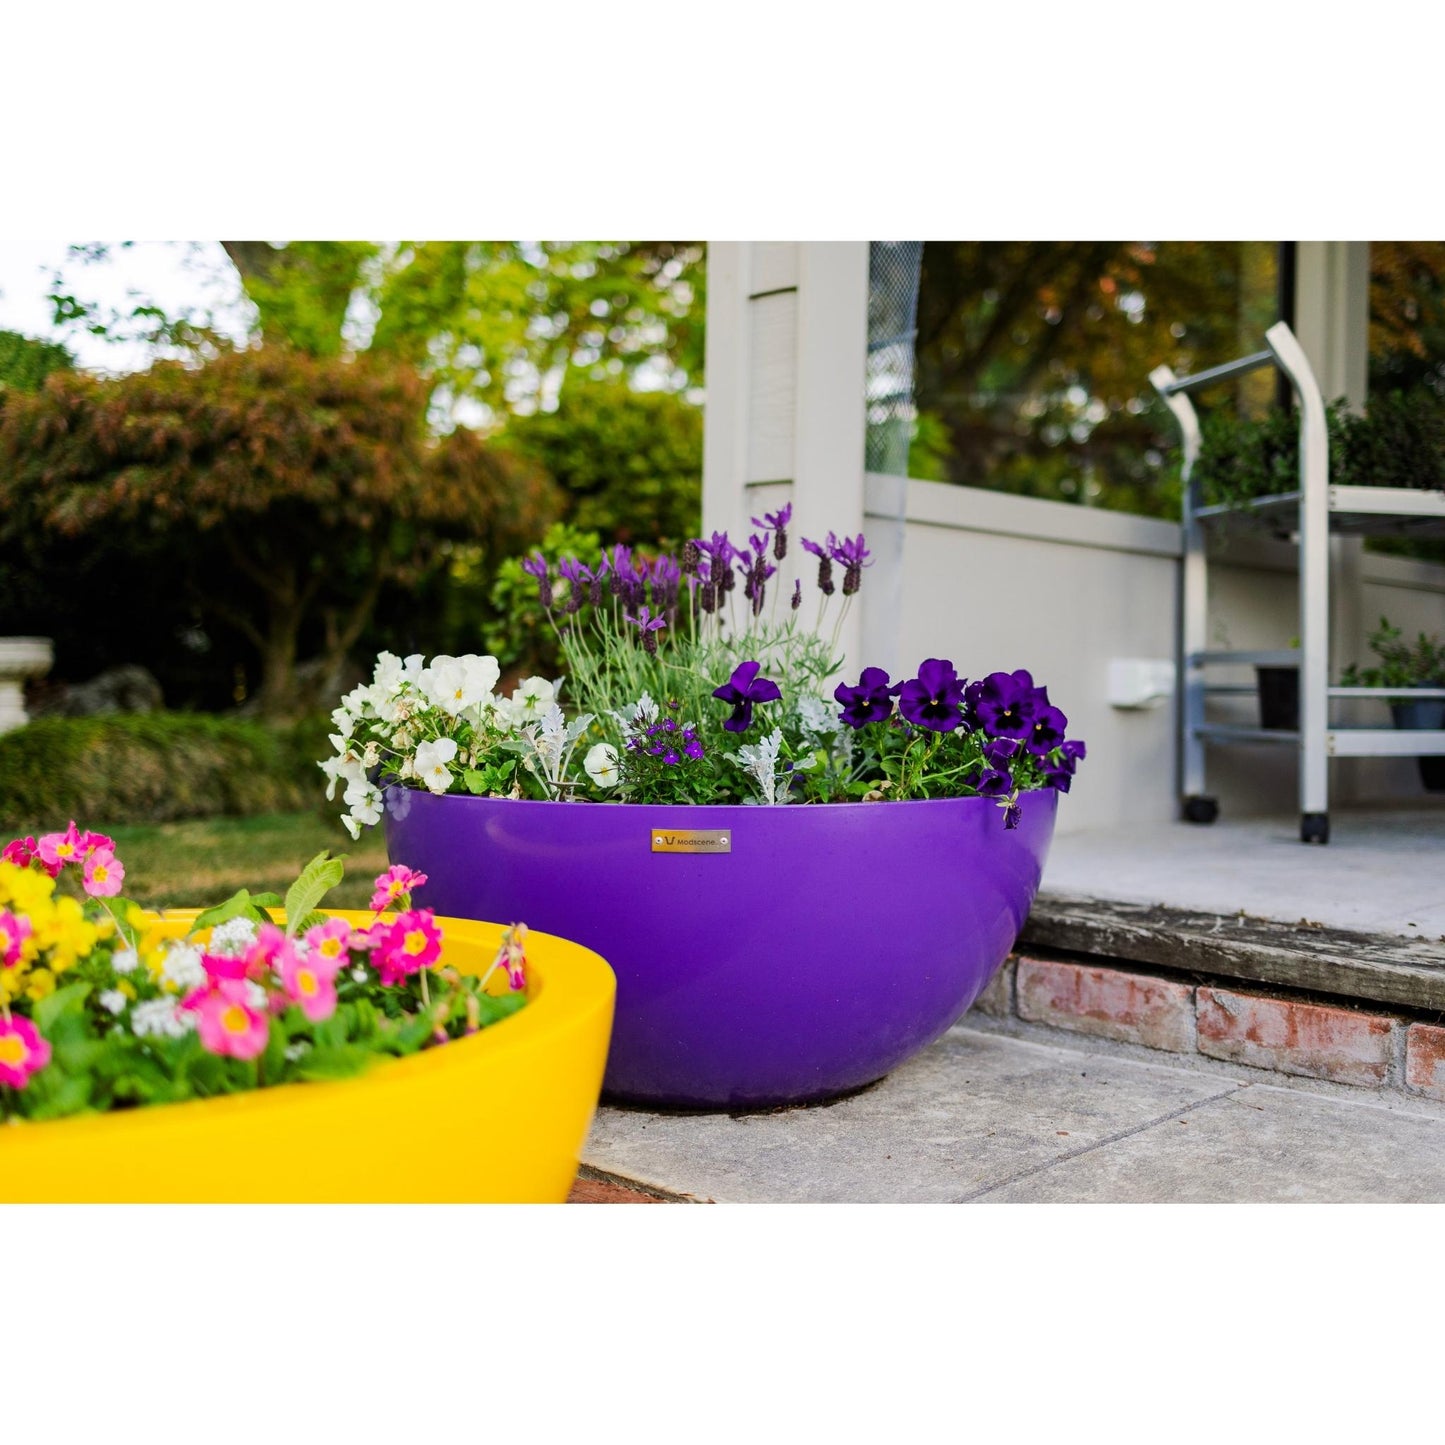 A purple Modscene planter bowl sits on the stairs of this garden house.